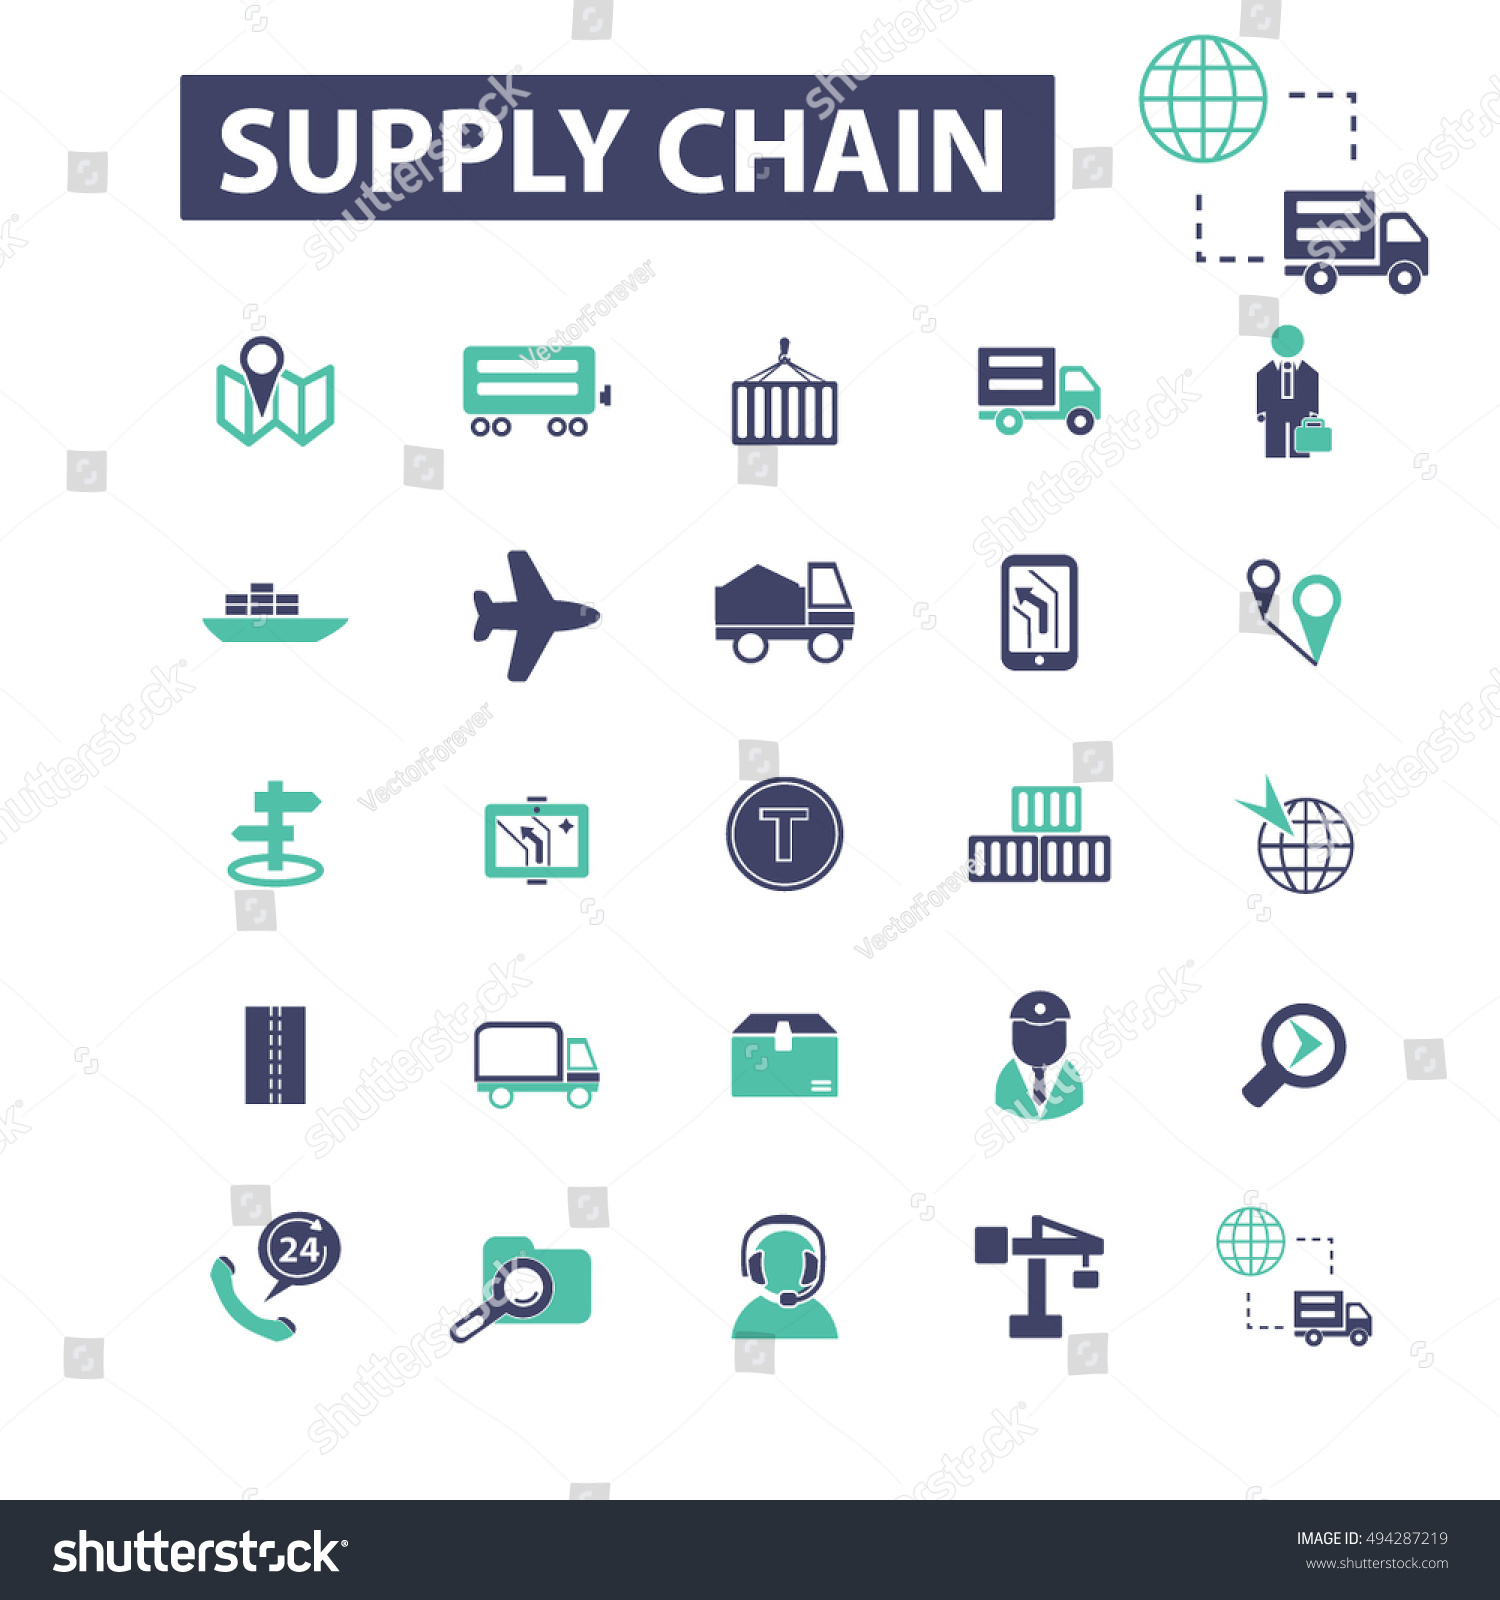 Supply Chain Icons Stock Vector Royalty Free Shutterstock Sexiz Pix 4014